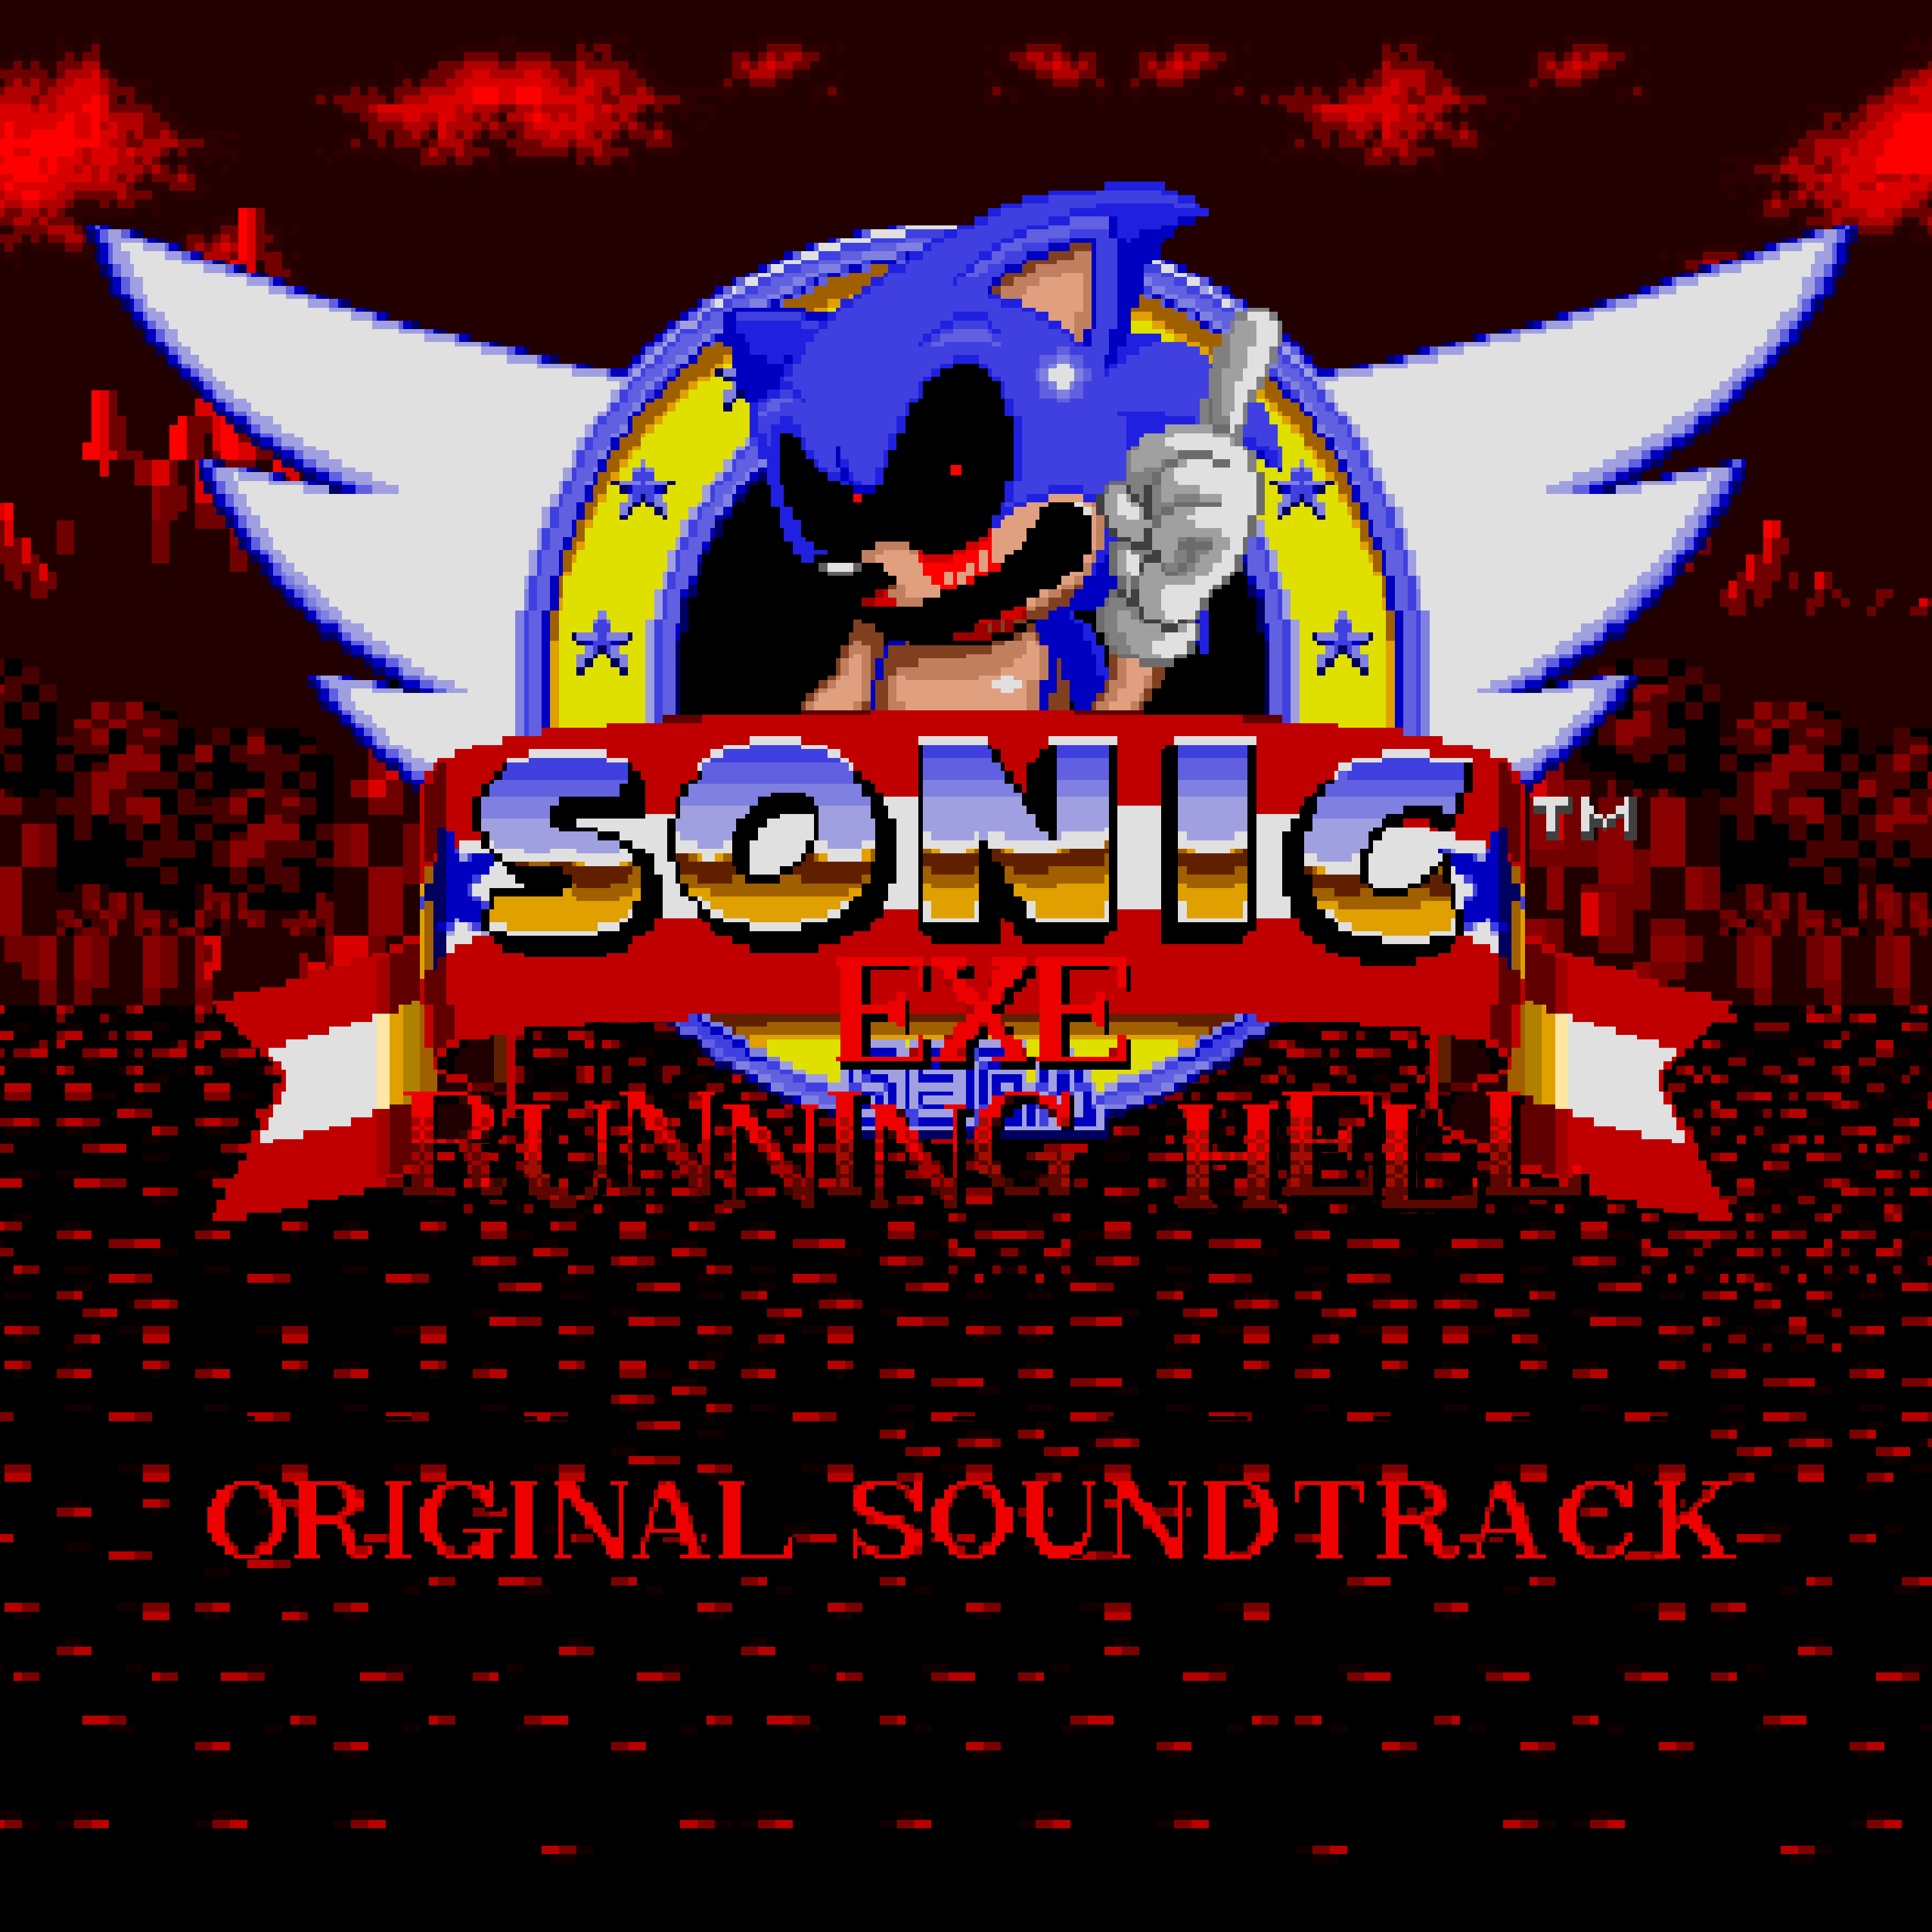 Stream Sonic.exe Spirits of Hell Round 2 Soundtrack Continue by Geovas